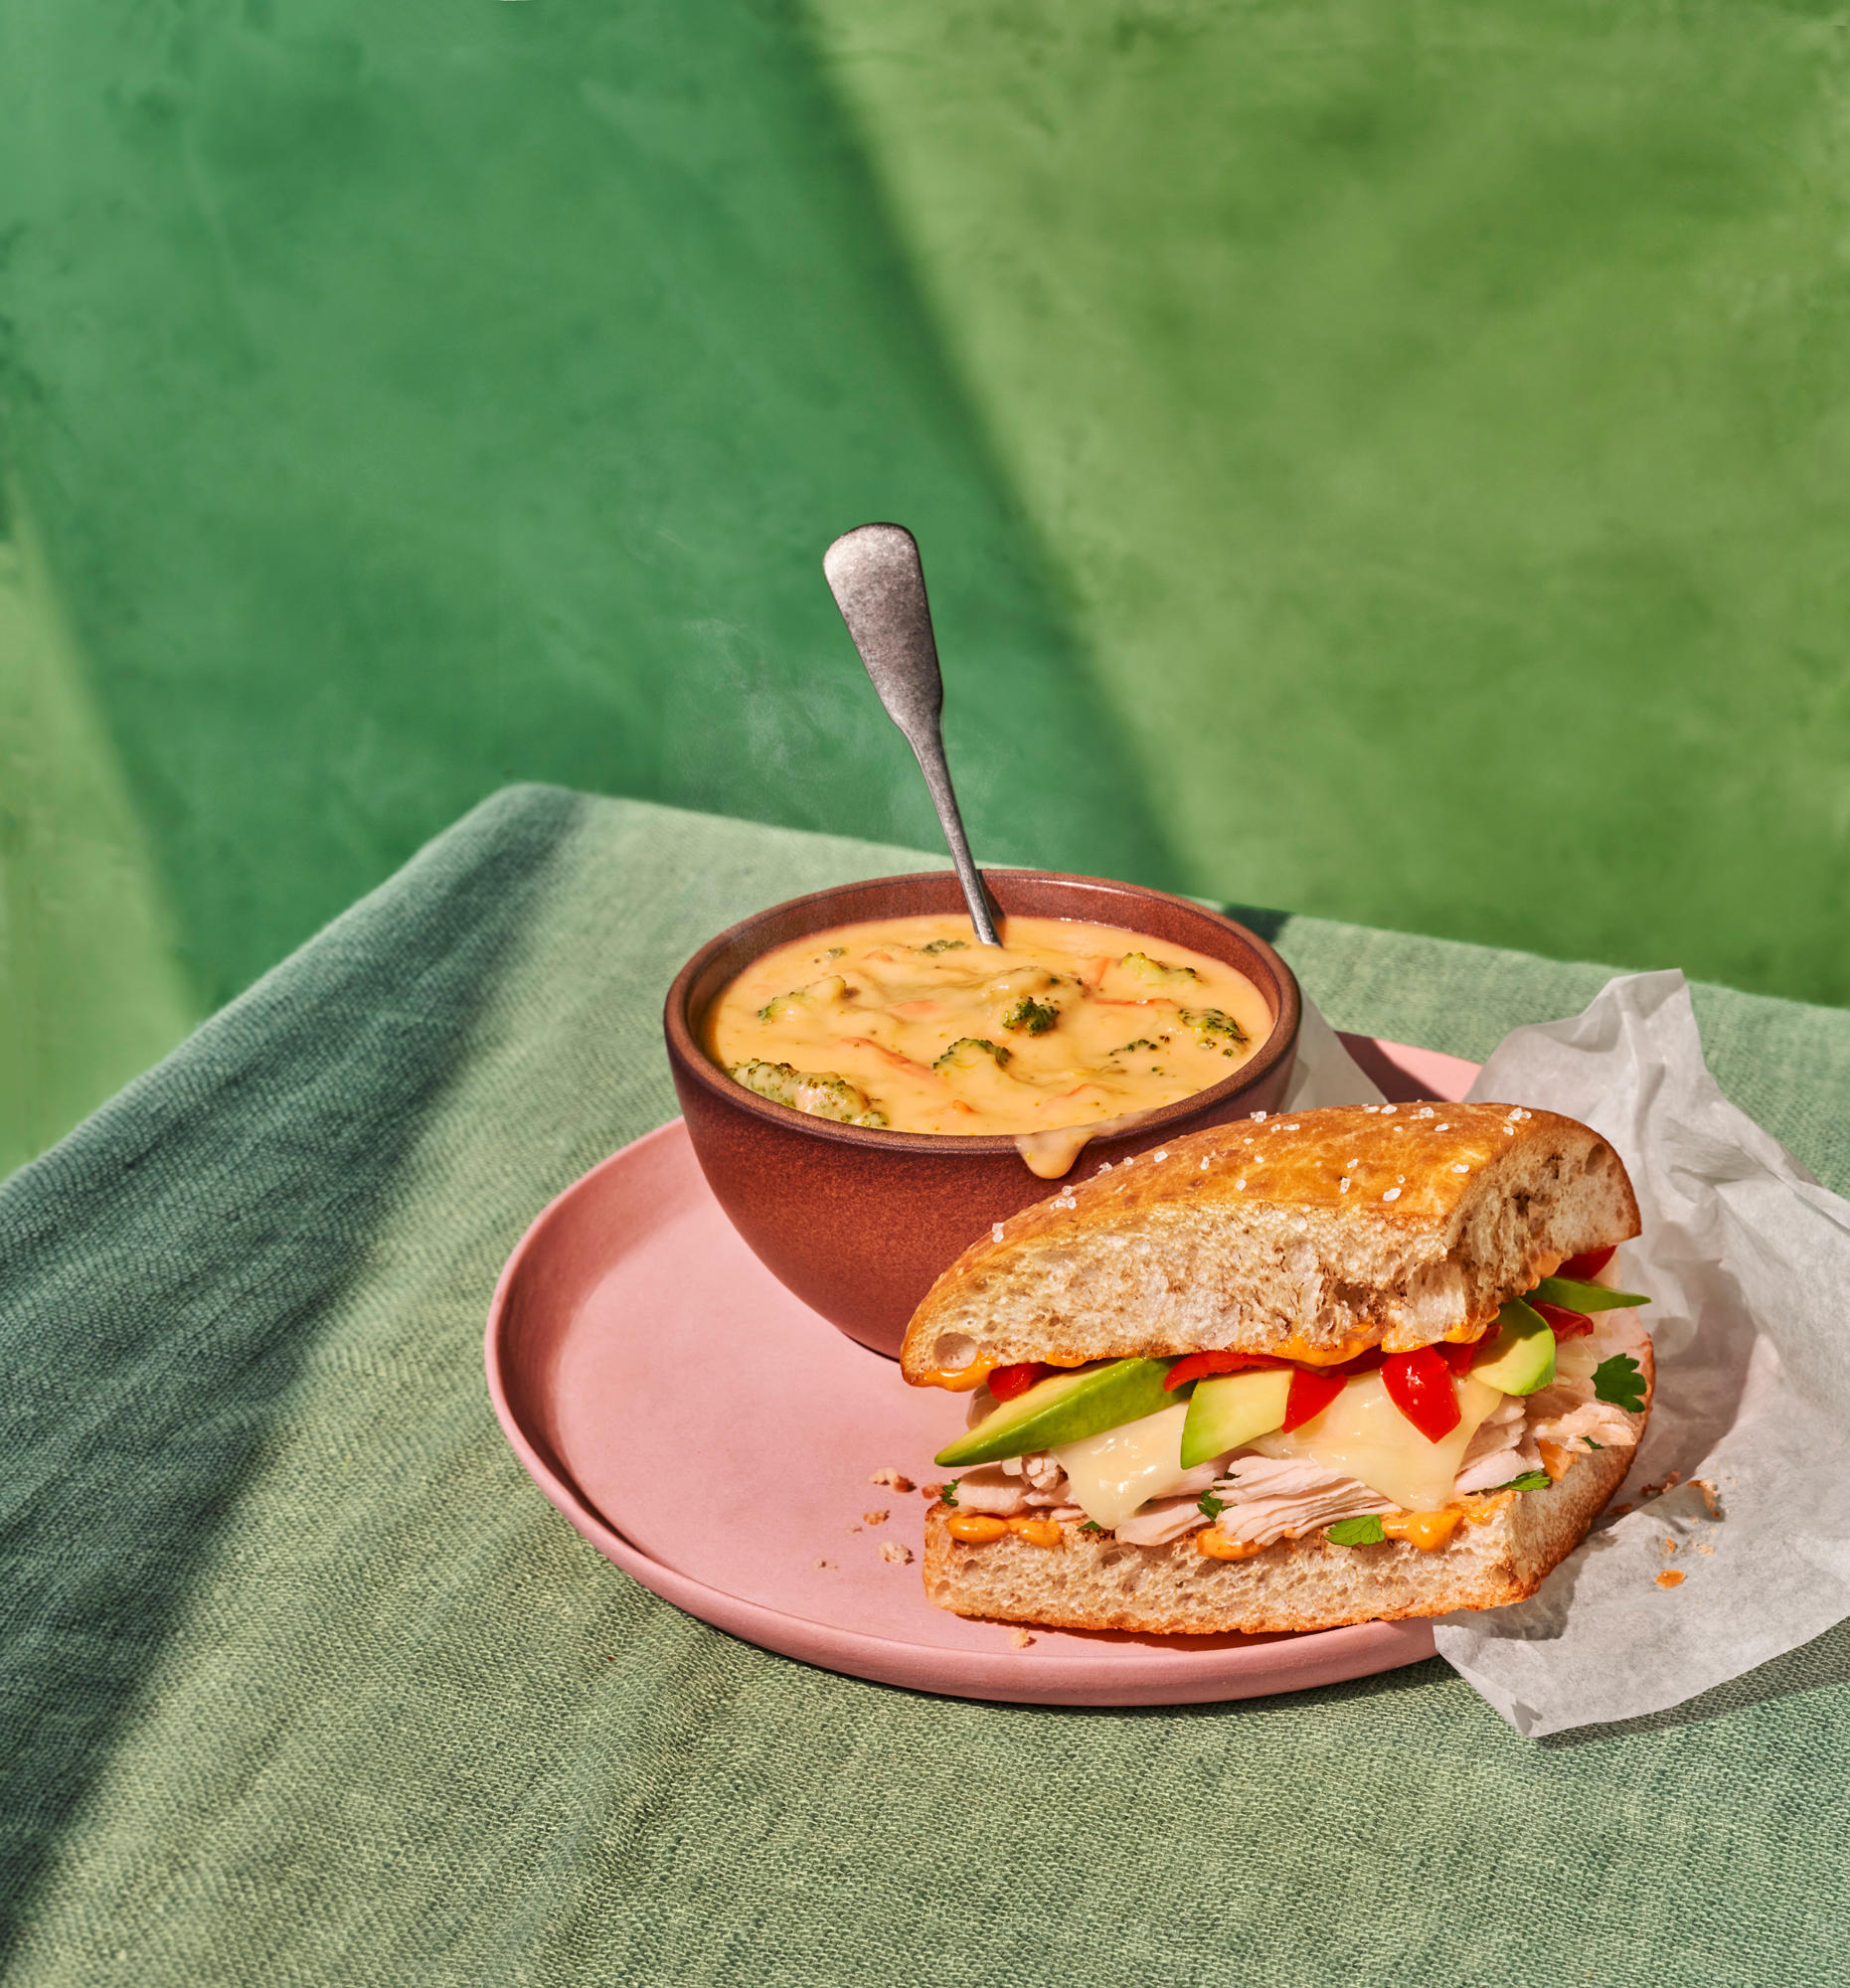 Chipotle Chicken Avo Melt & Broccoli Cheddar Soup Cup You Pick 2 Panera Bread Grovetown (706)604-6023